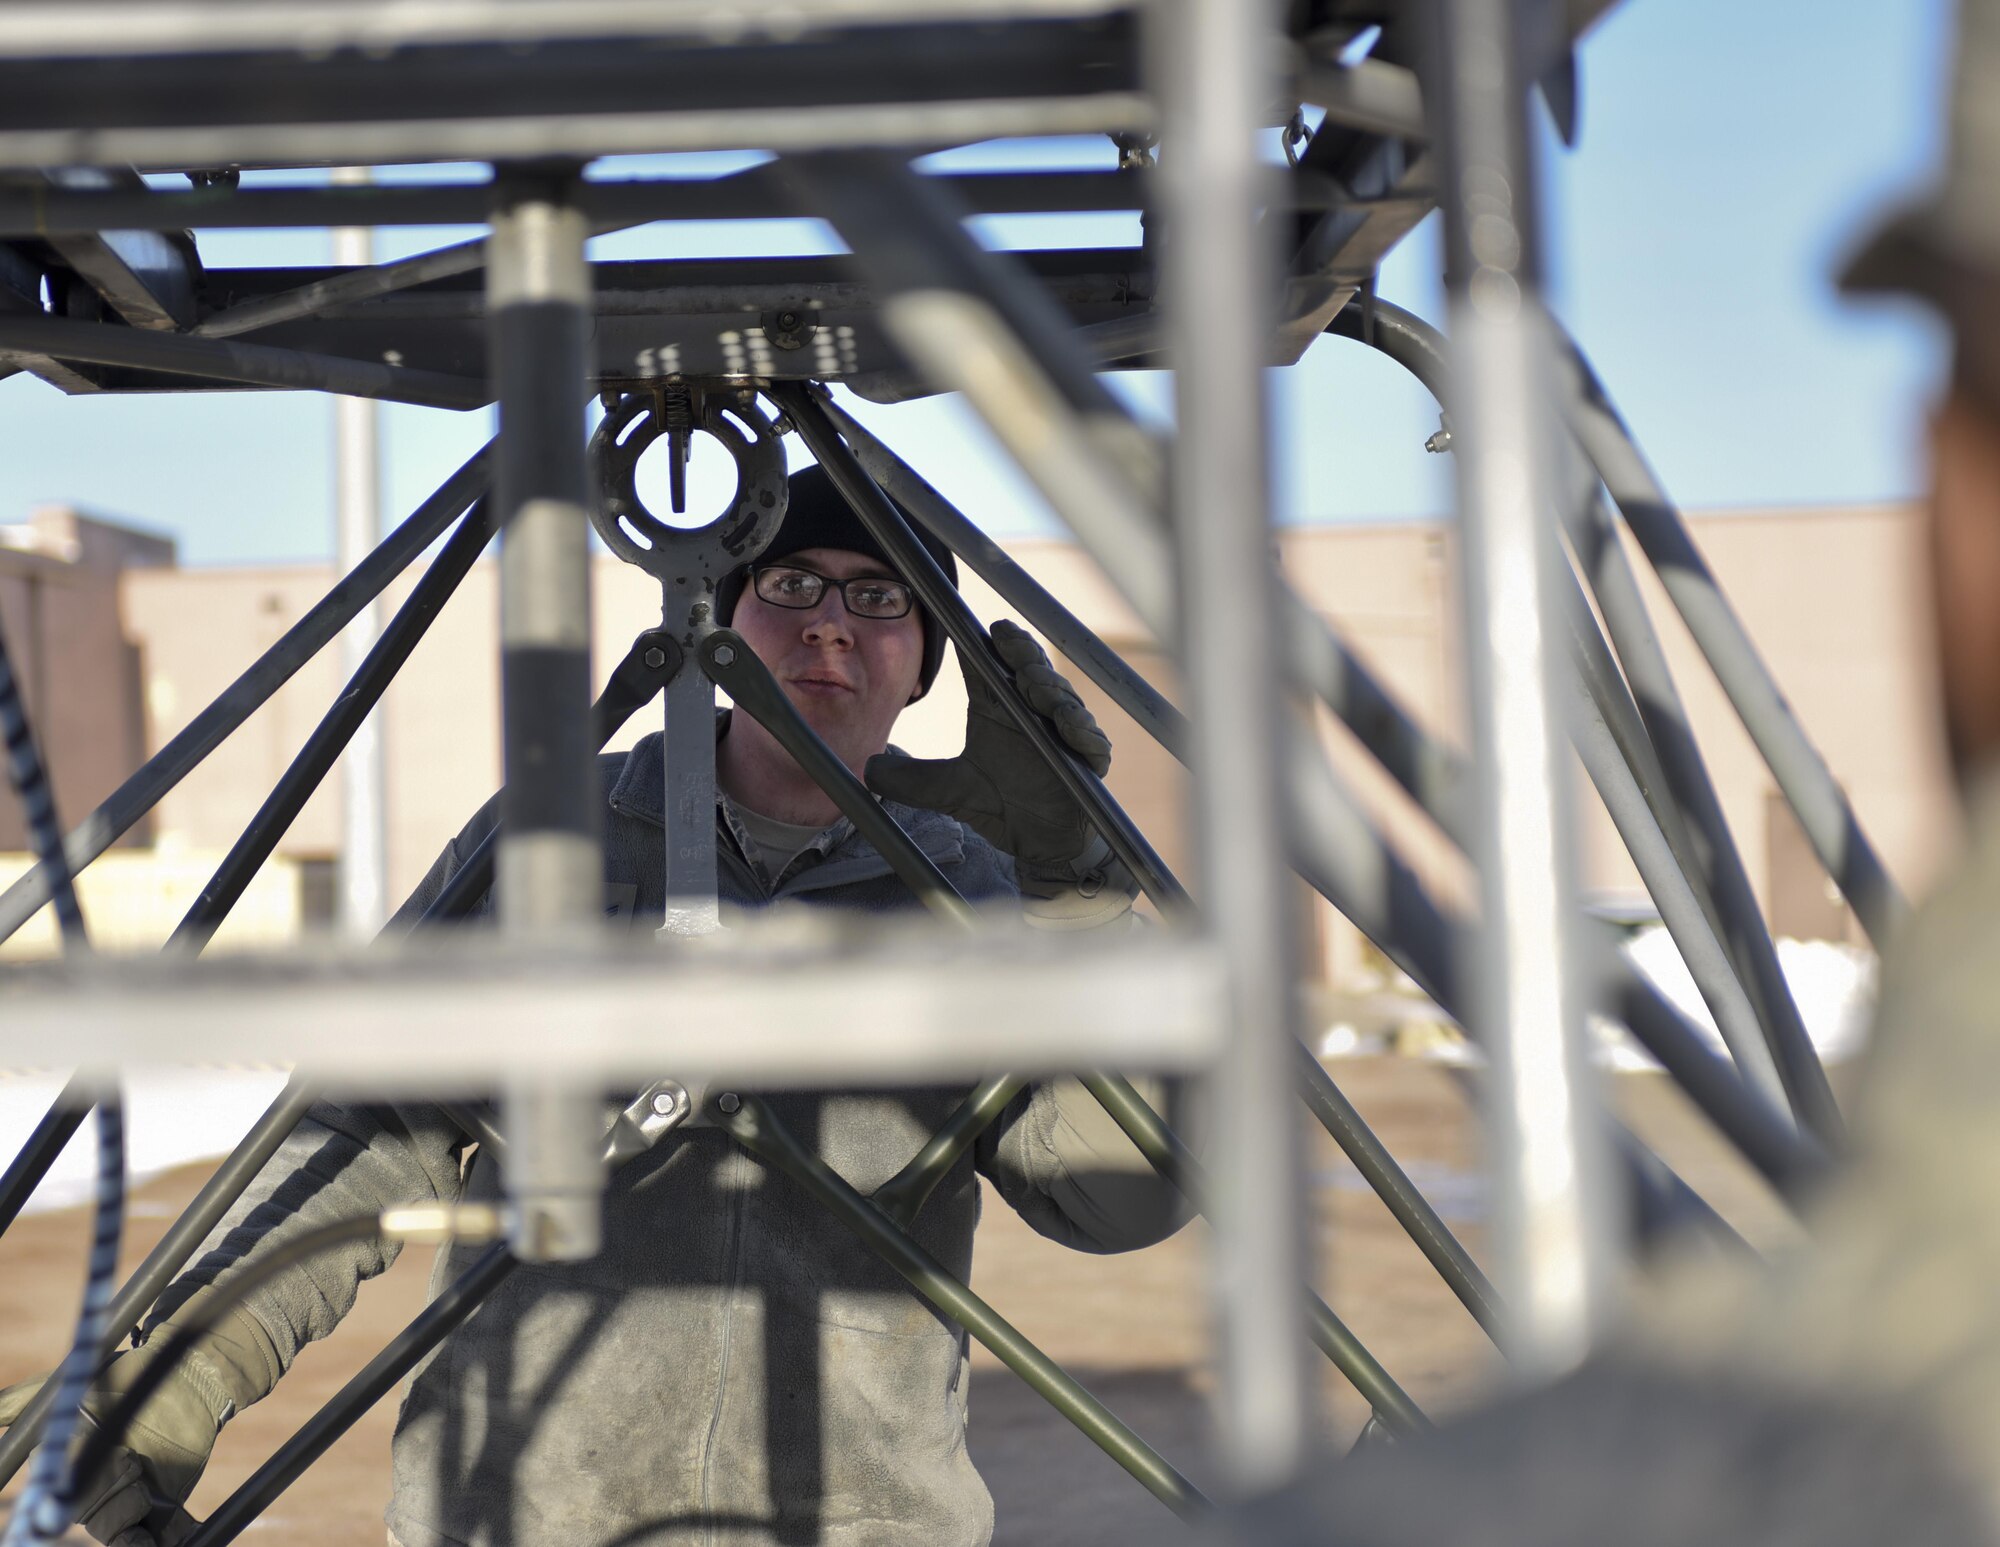 Senior Airman Matthew Nielson, a logistic specialist assigned to the 28th Logistic Readiness Squadron, coordinates with another Airman while loading a platform onto a truck Jan. 17, 2017, at Ellsworth Air Force Base, S.D. The platforms, generators, flood lights and other equipment loaded will be used at Red Flag 17-1—an Air Force-wide exercise testing air-to-air combat. (U.S. Air Force photo by Airman 1st Class Randahl J. Jenson)